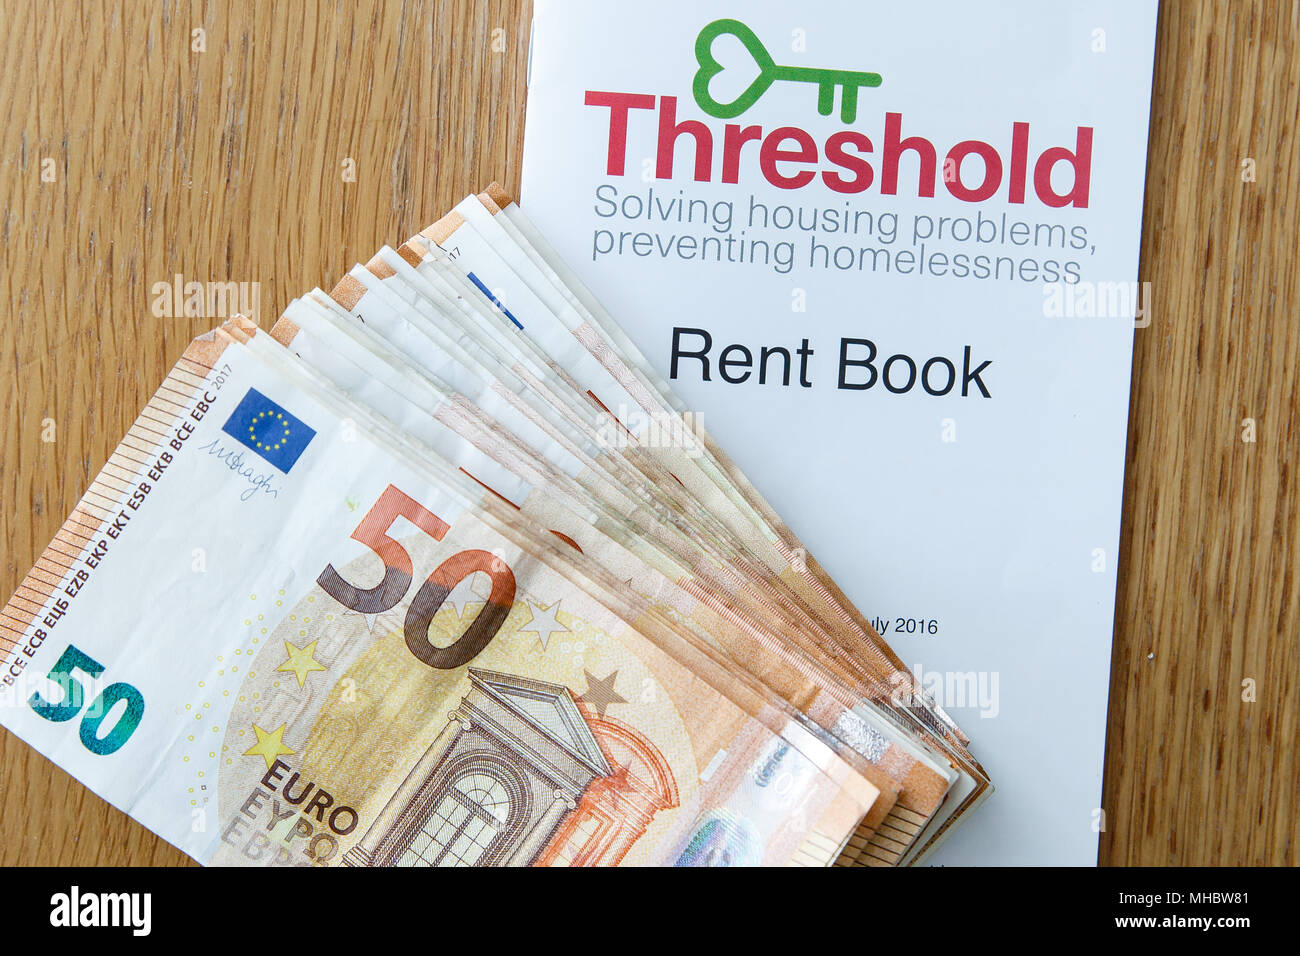 Cash for landlord for rented property and rental book from Threshold. Housing crisis. Cost of living in Ireland rising as rents continue to increase. Stock Photo